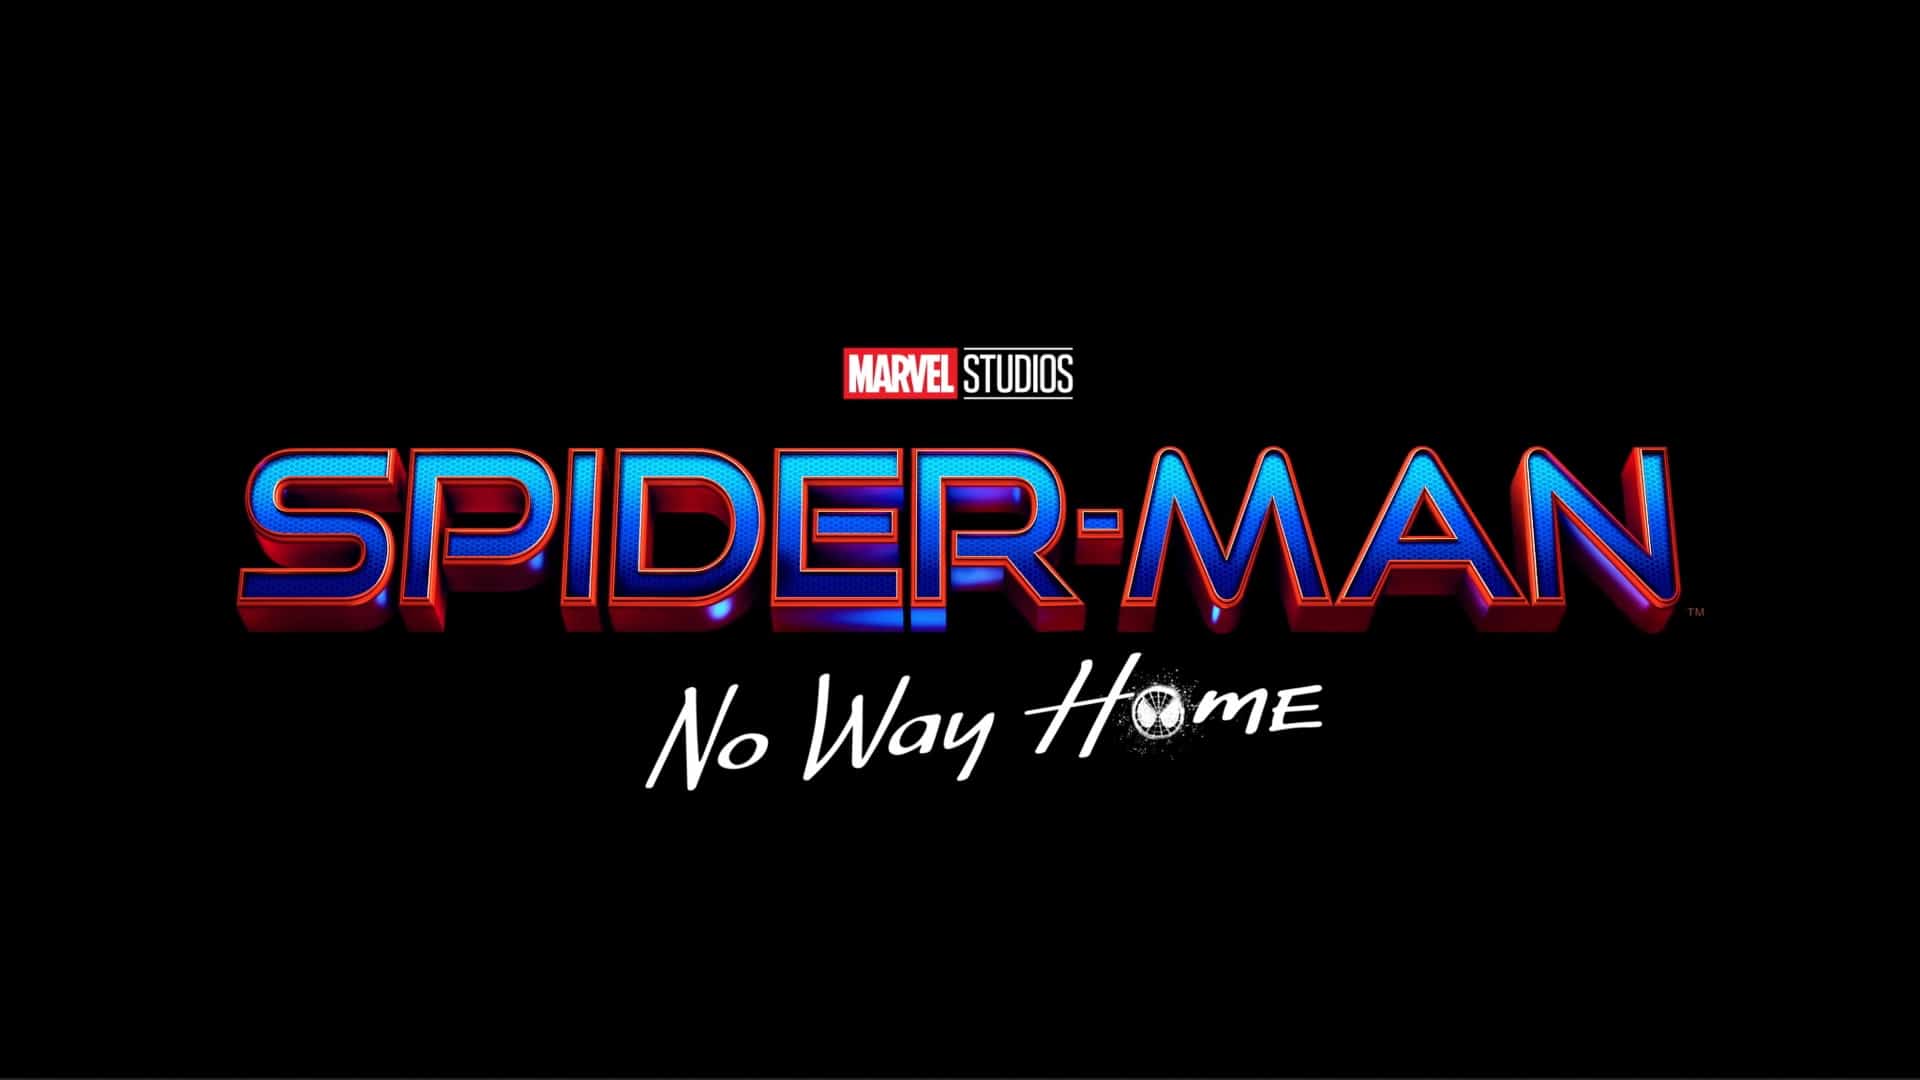 Spiderman: No Way Home (2021) – Review/ Summary (with Spoilers)